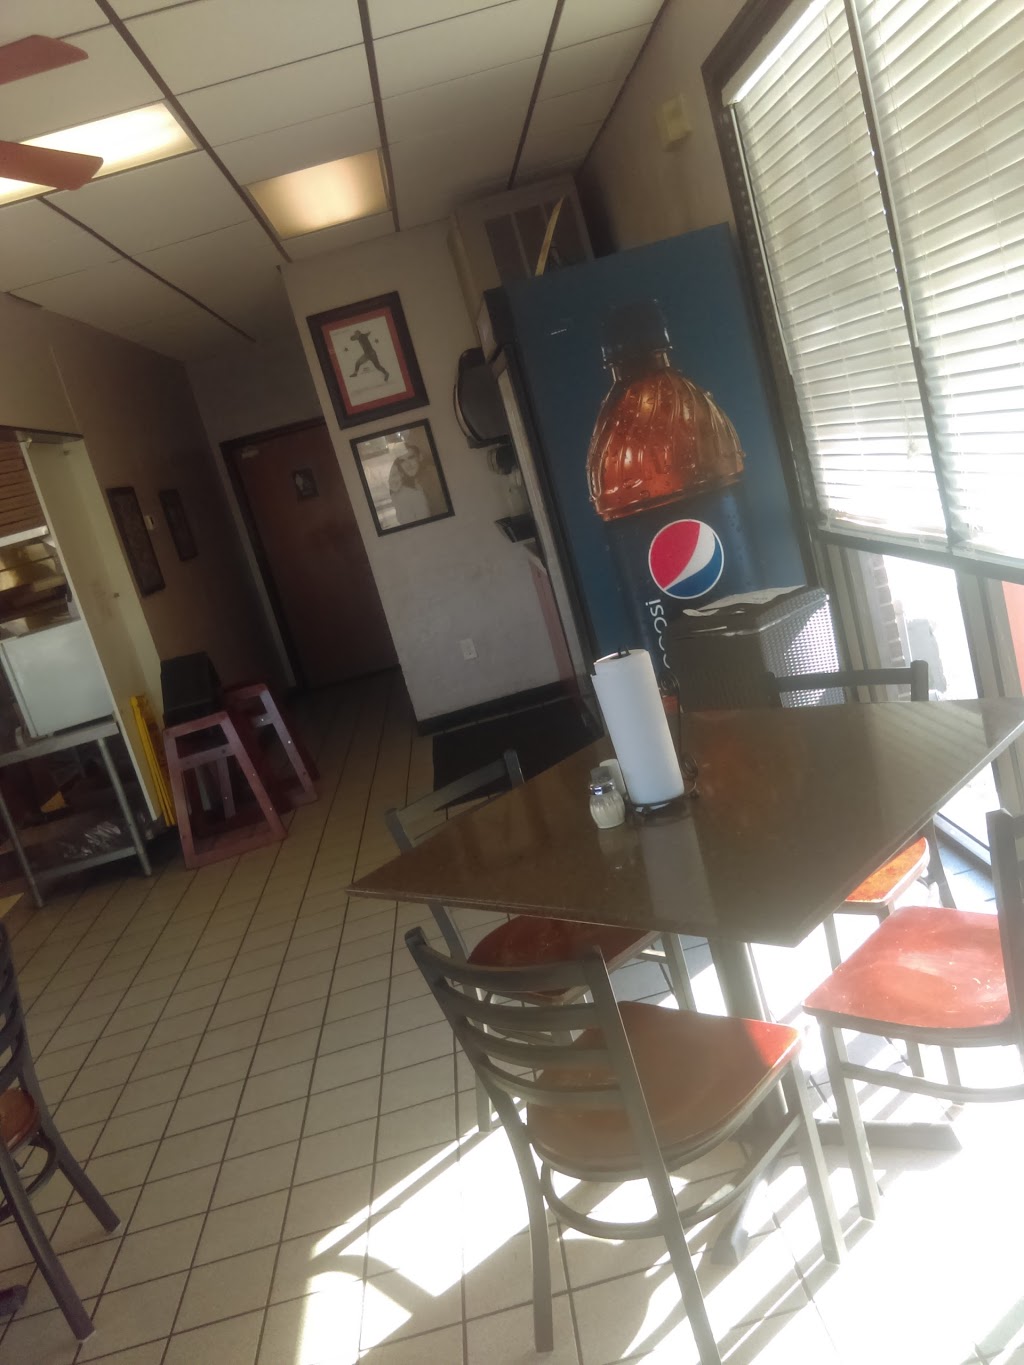 Knollas Pizza Cafe | 7343 W Central Ave, Wichita, KS 67212 | Phone: (316) 773-4496